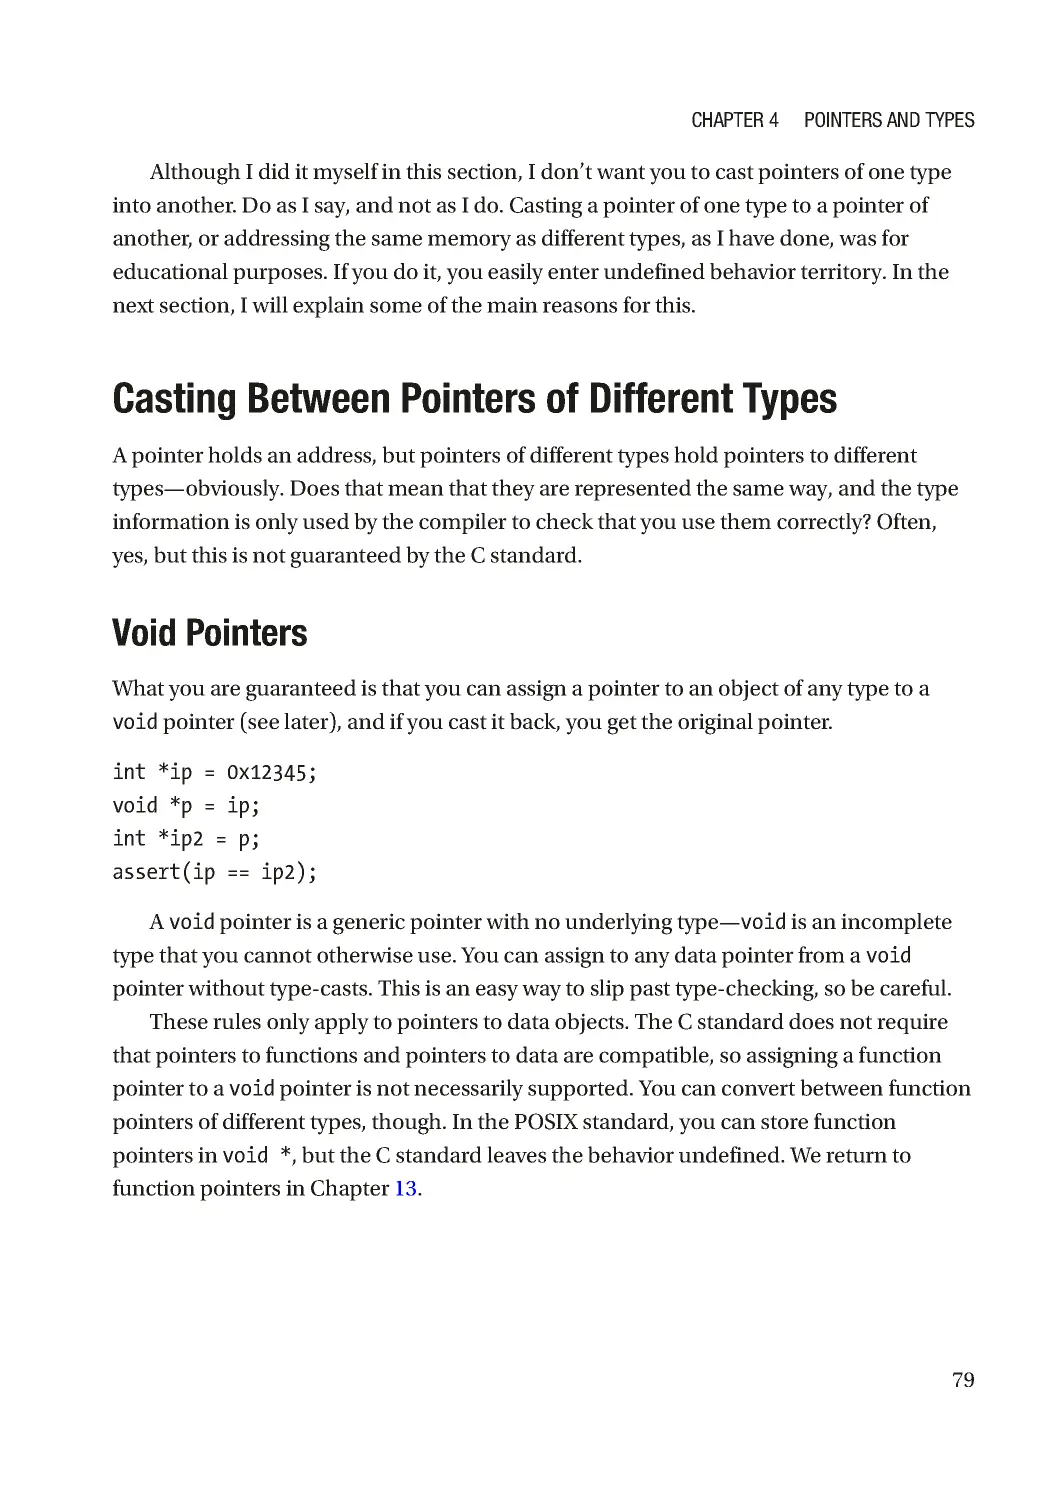 Casting Between Pointers of Different Types